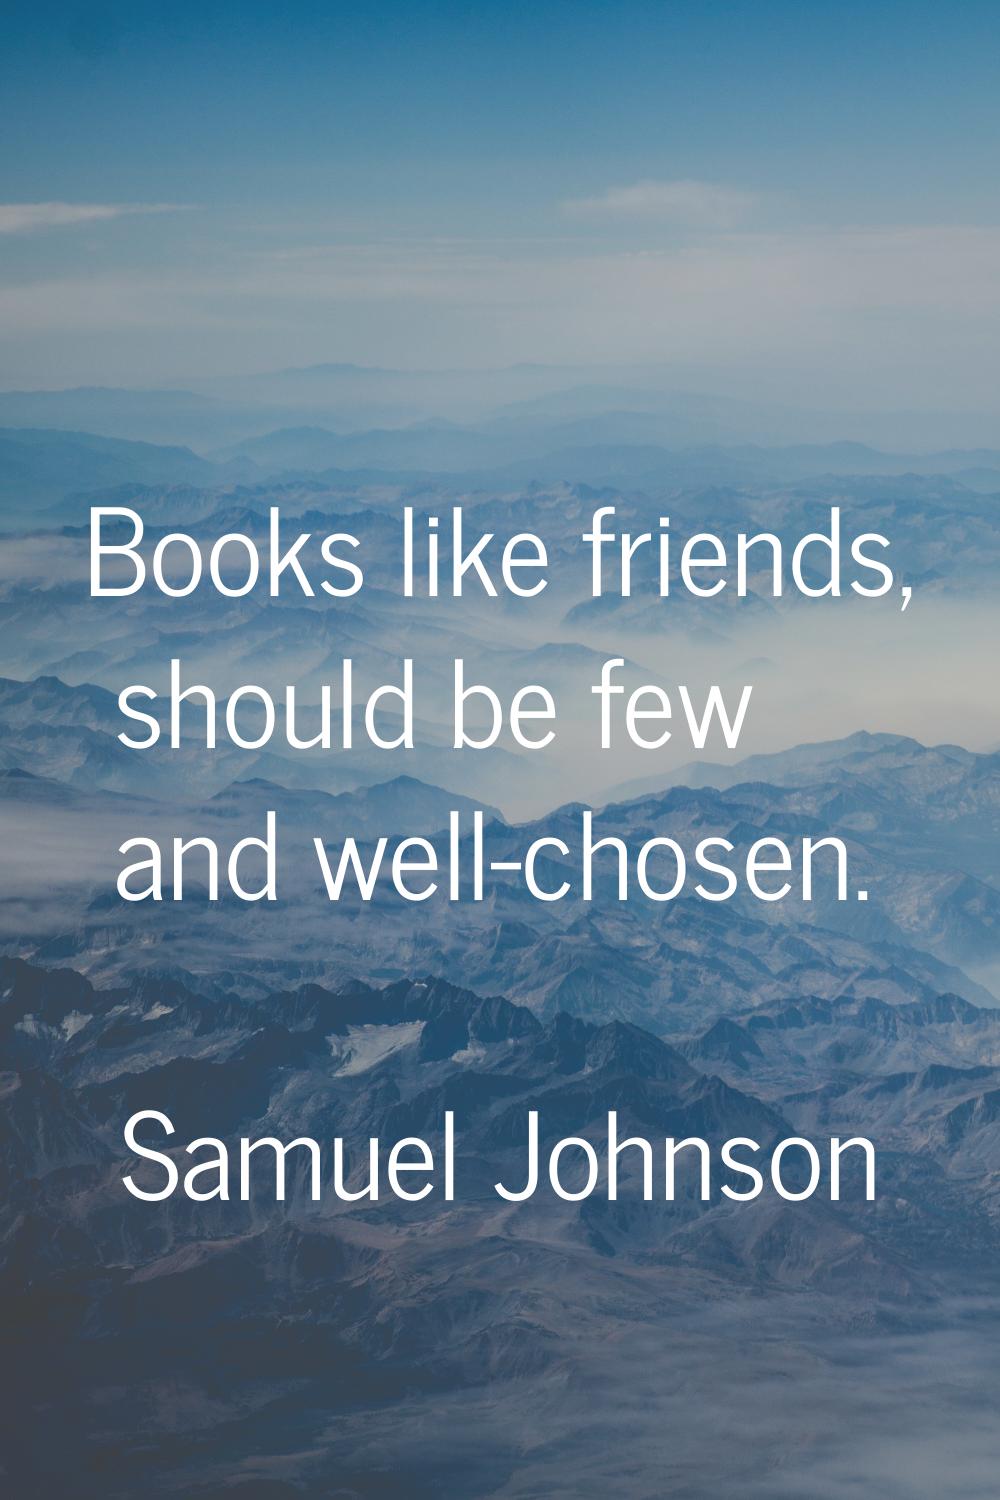 Books like friends, should be few and well-chosen.